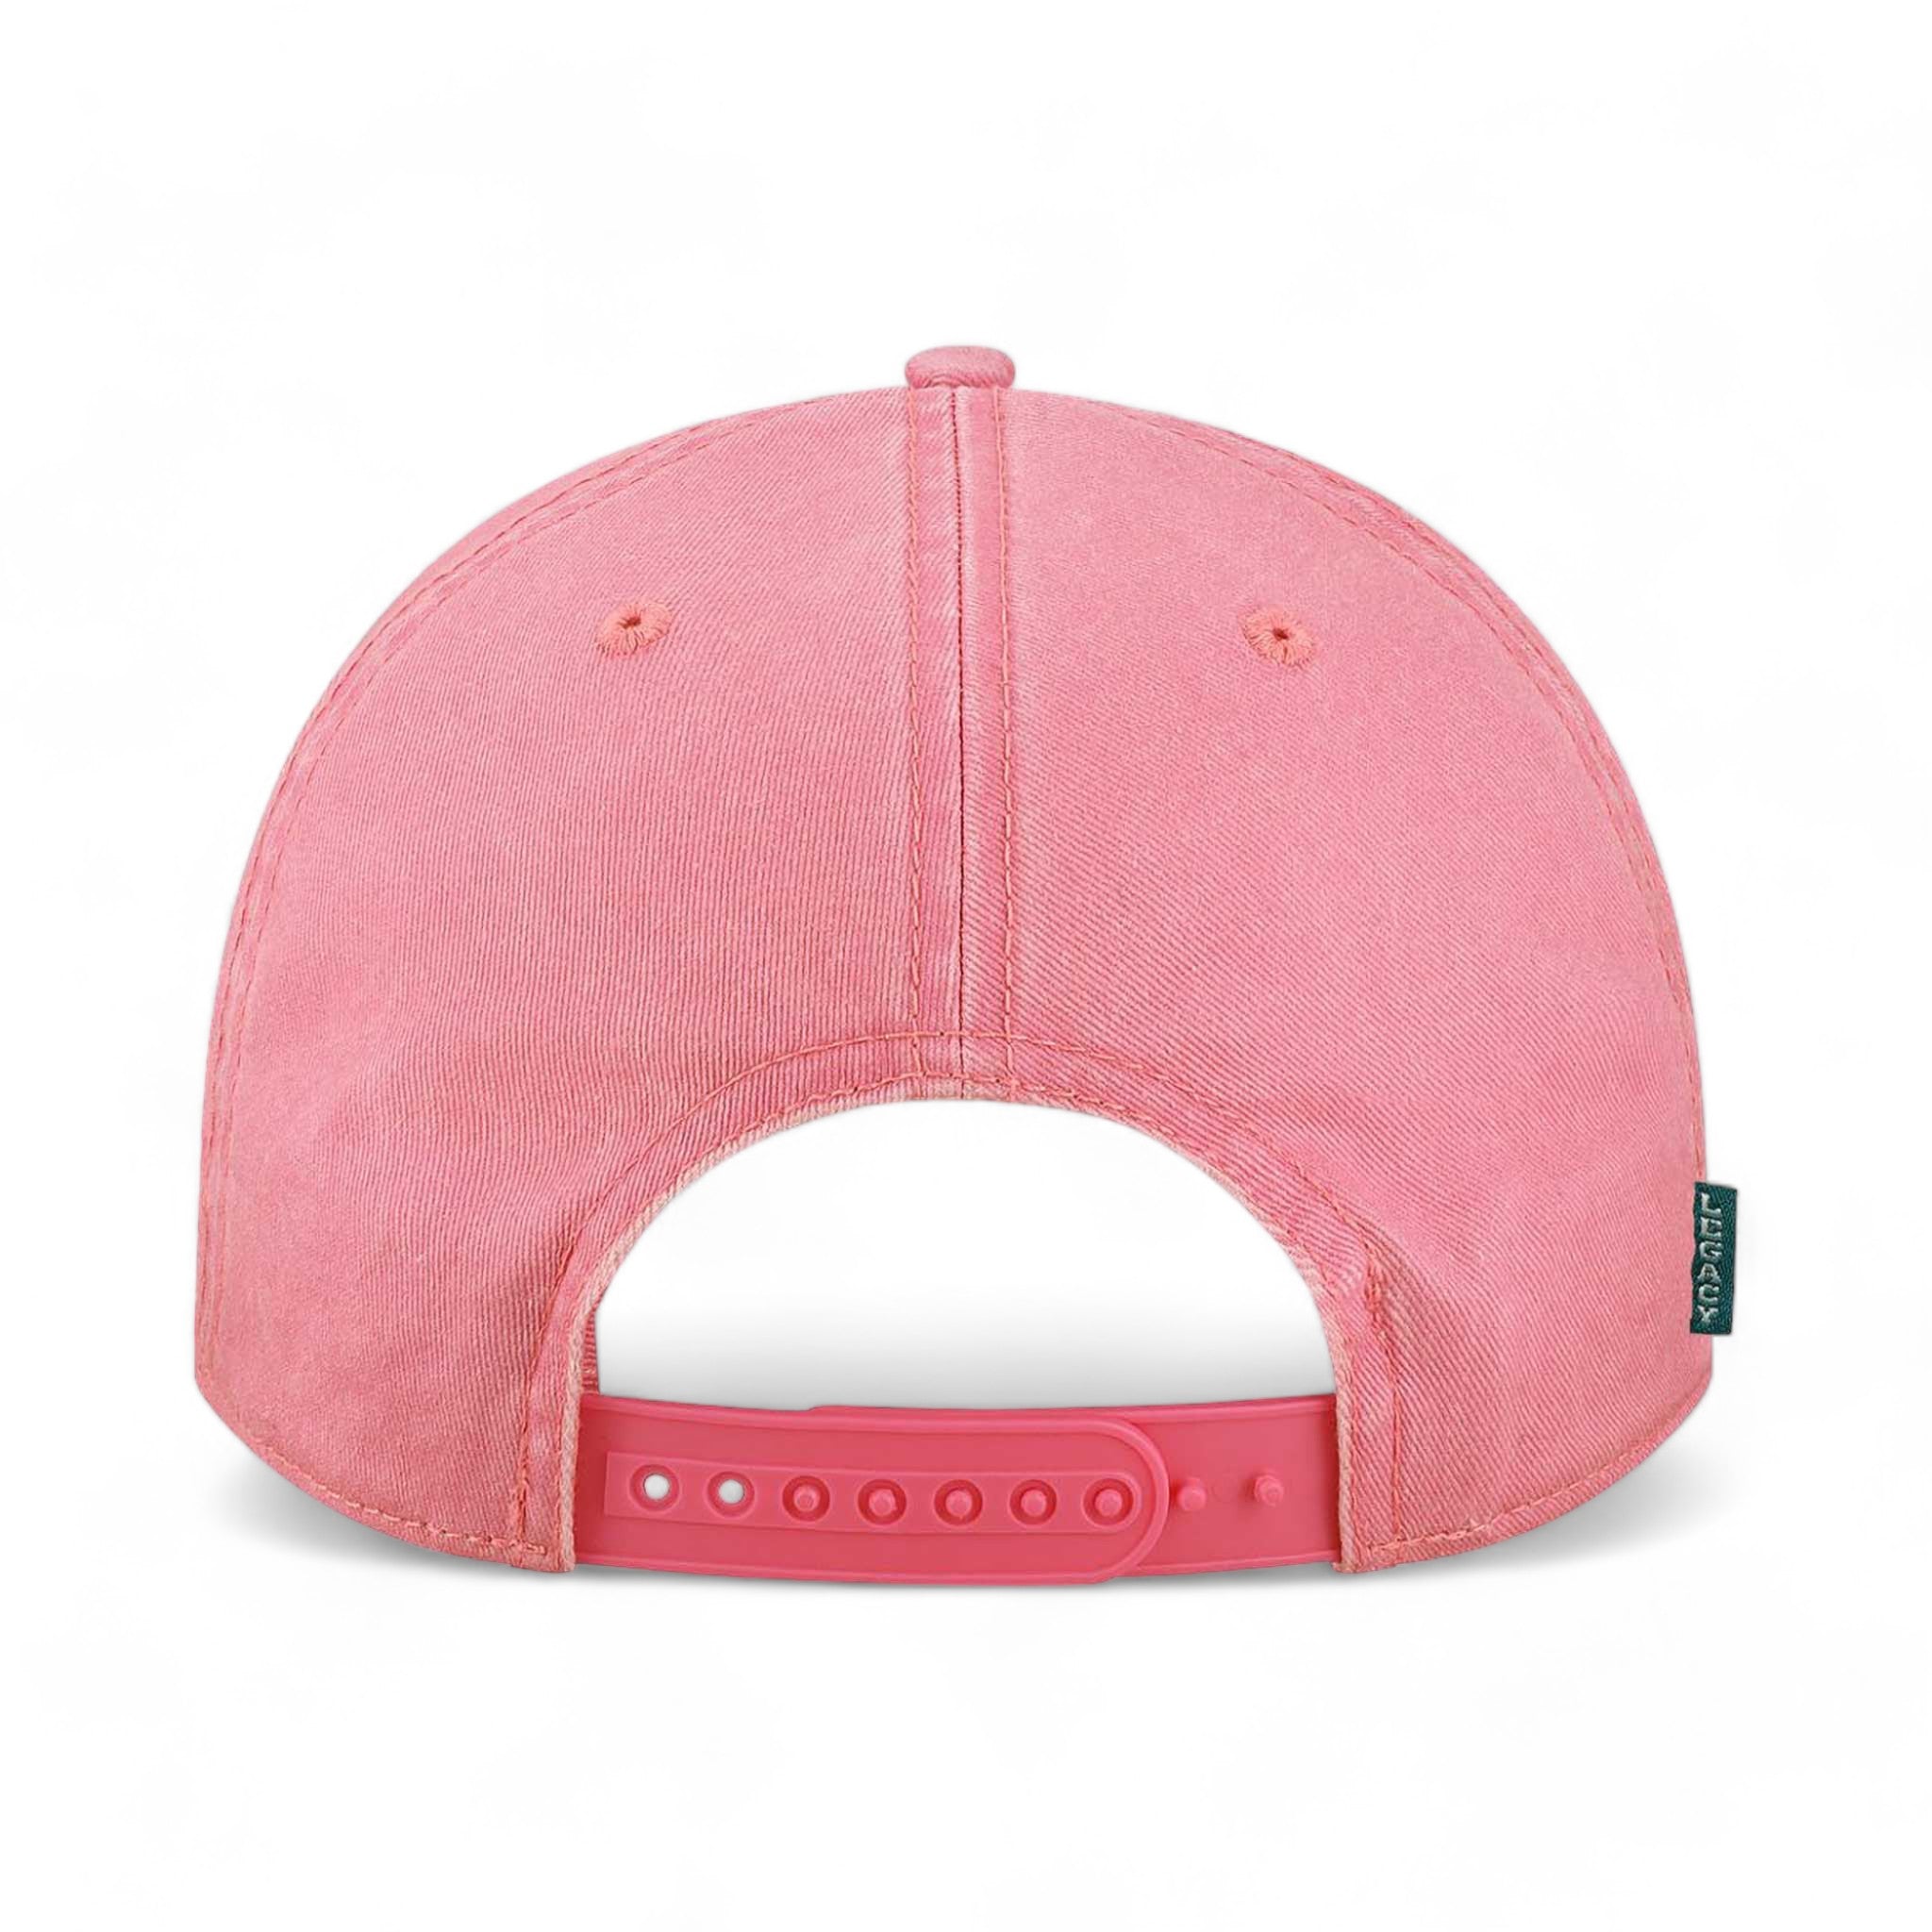 Back view of LEGACY SKULLY custom hat in pink